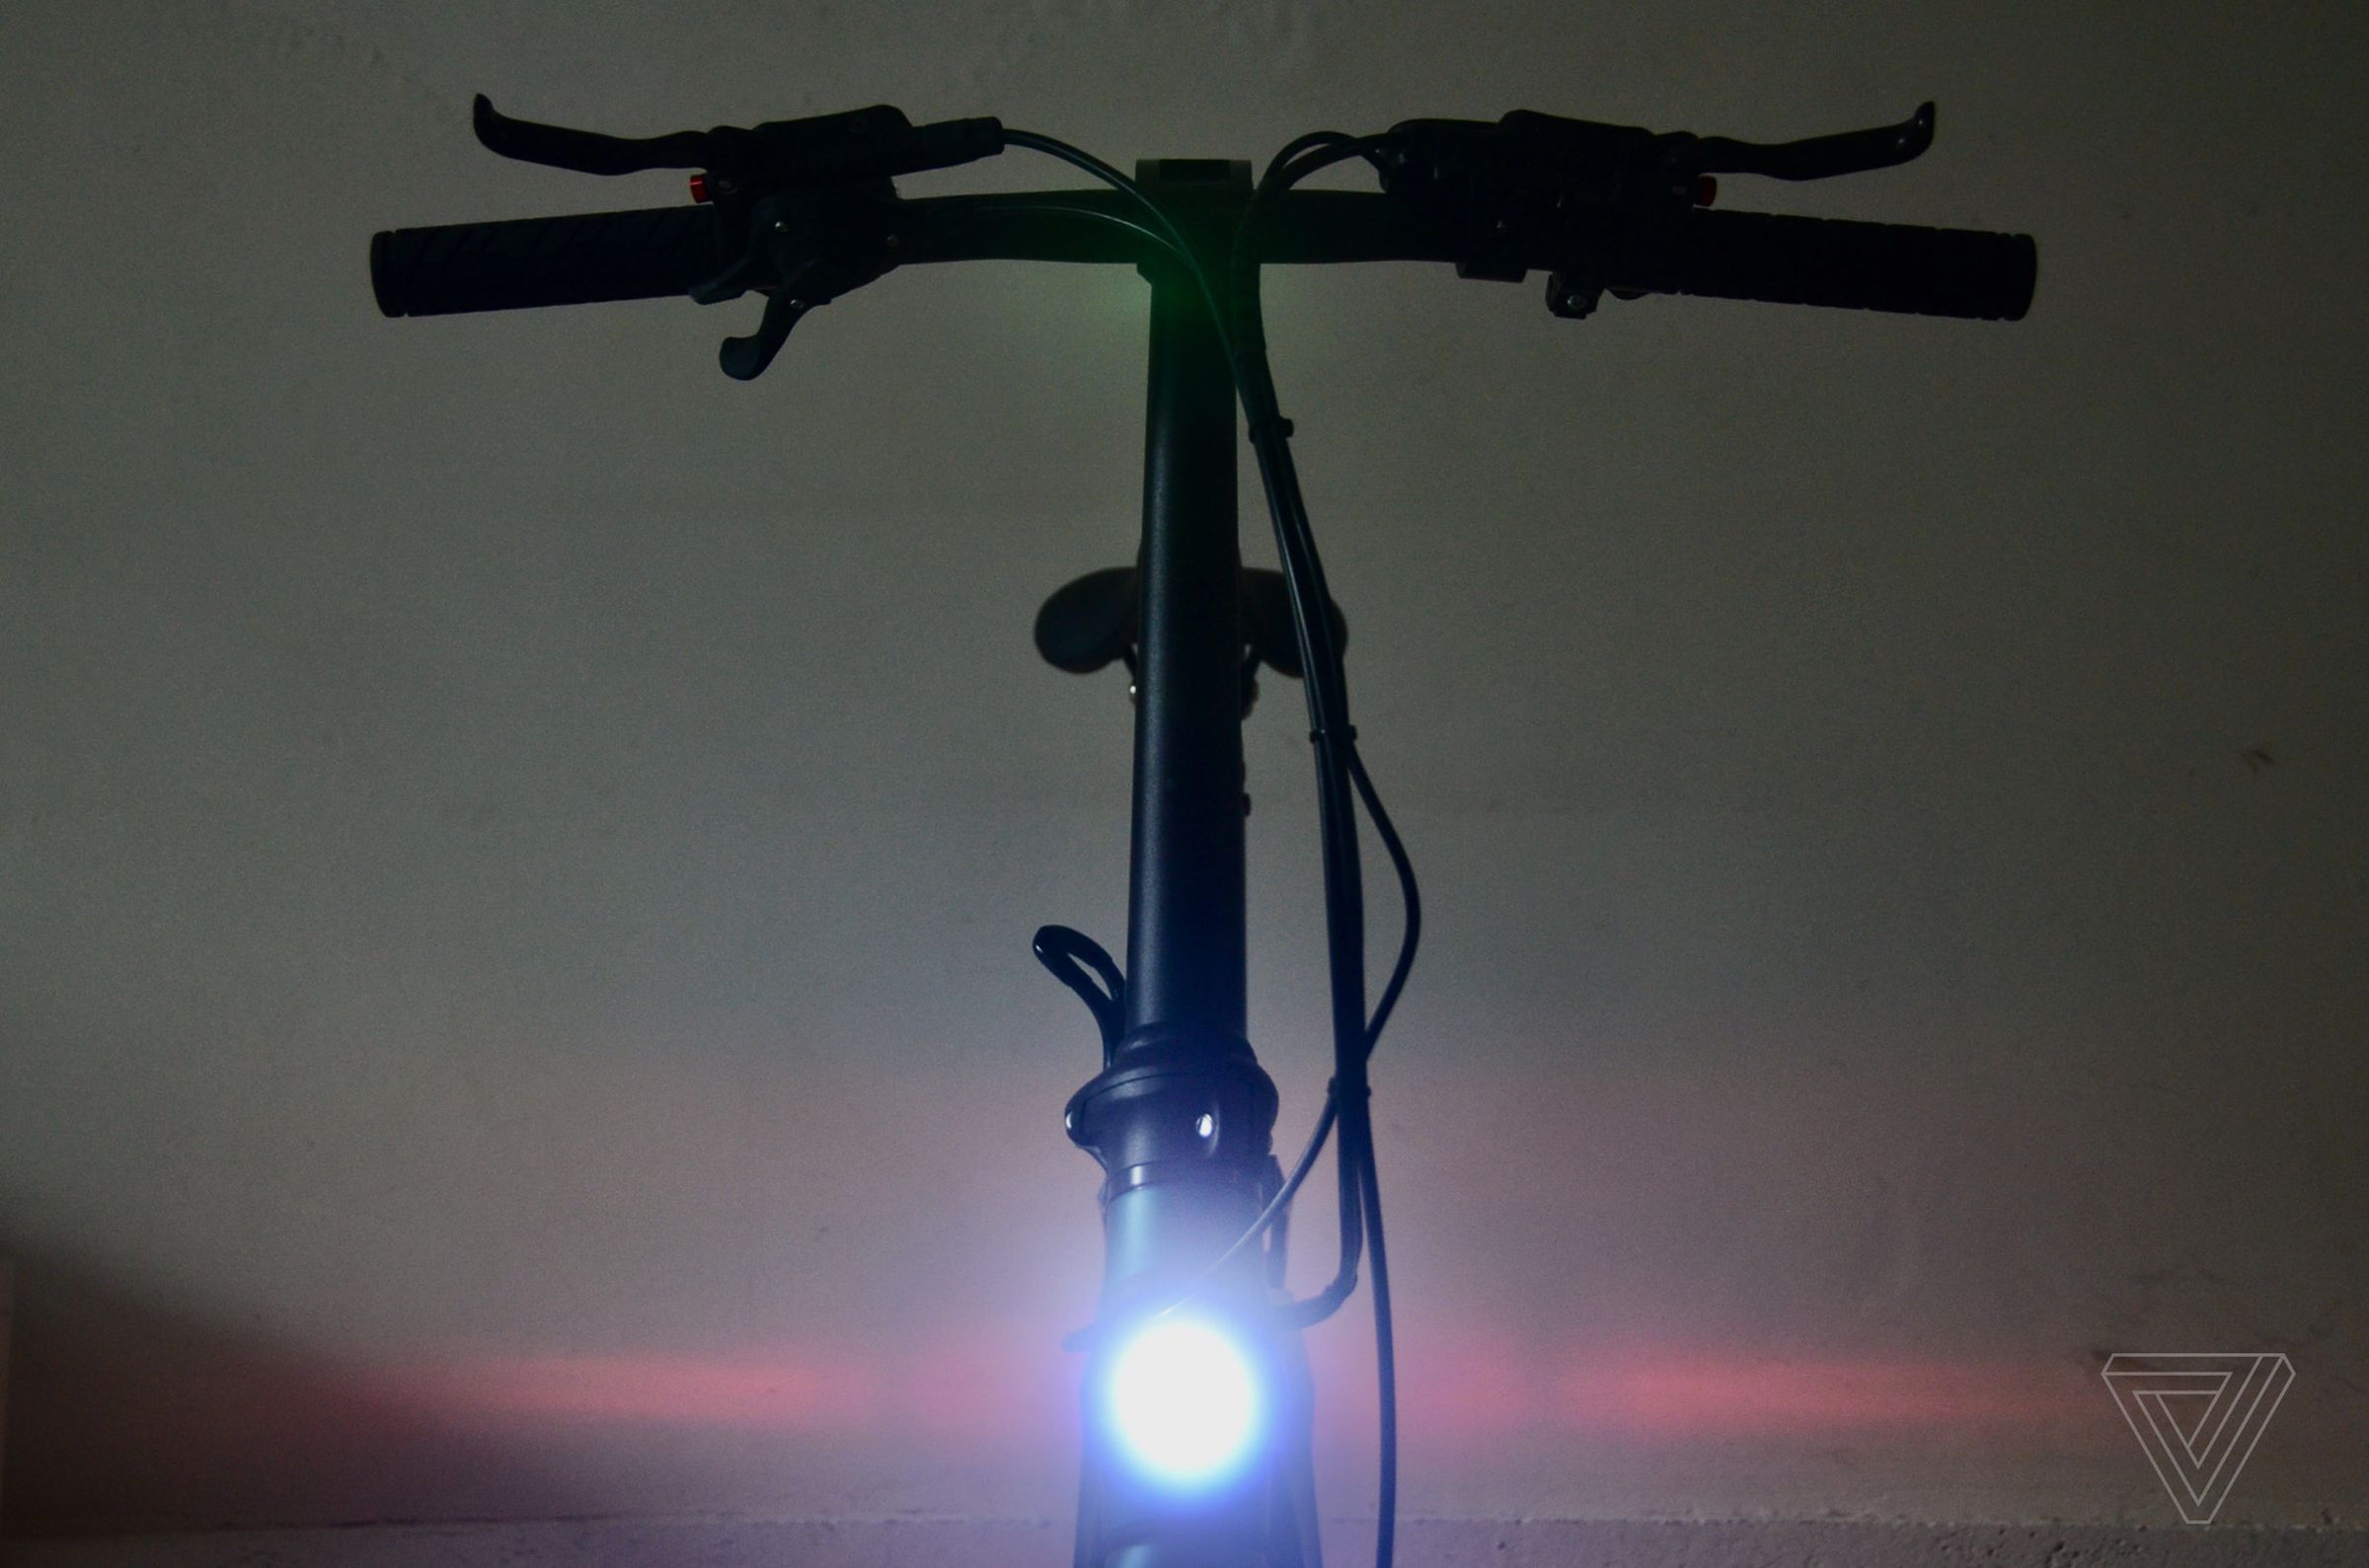 The Fiido X has integrated front and rear lighting.